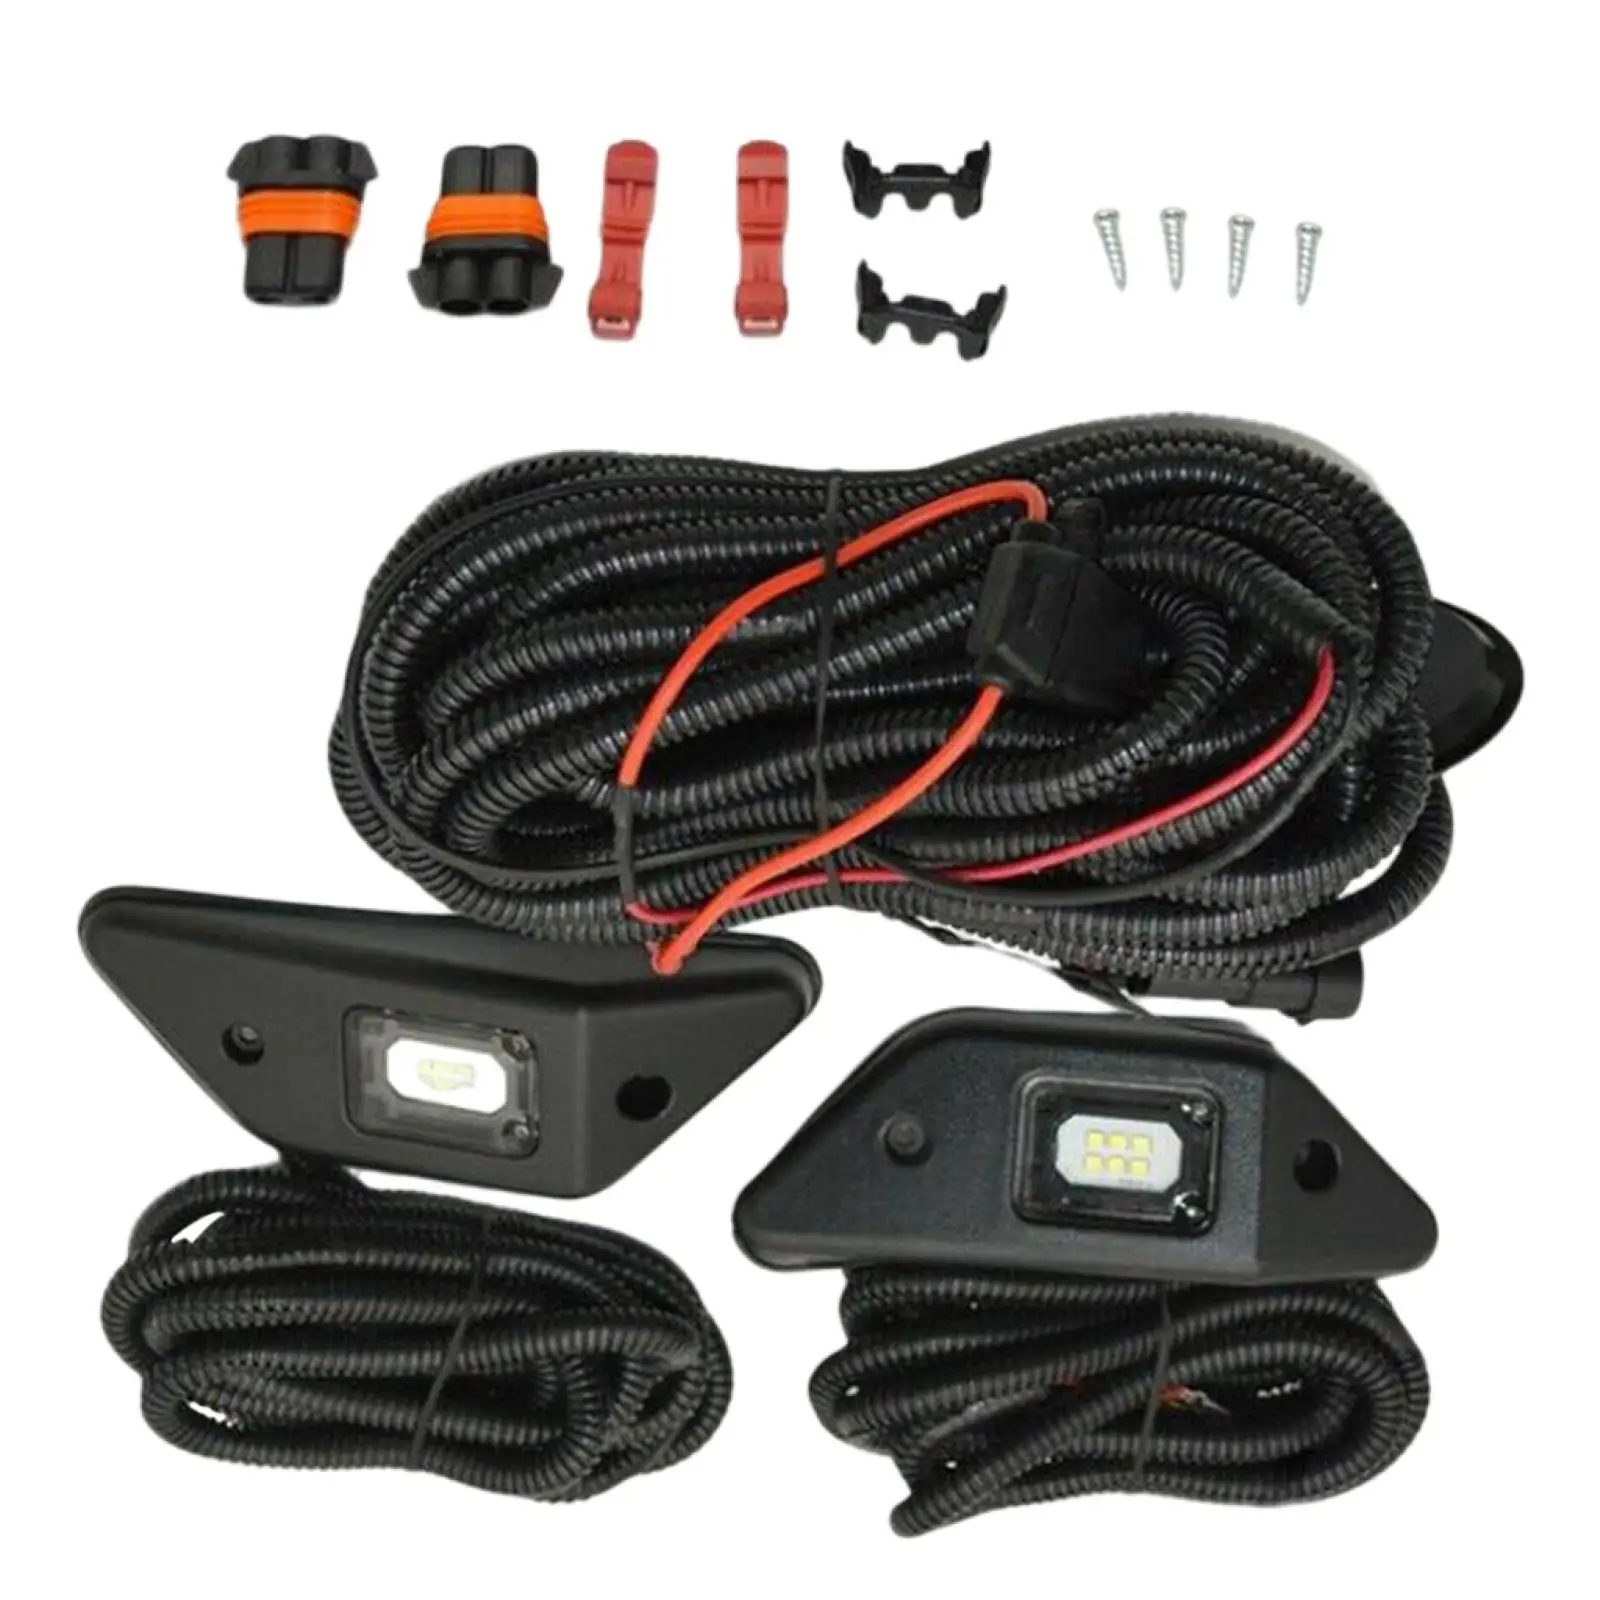   Lighting Kit, Replace Part 00016-341801634187 Wiring Harness  for  